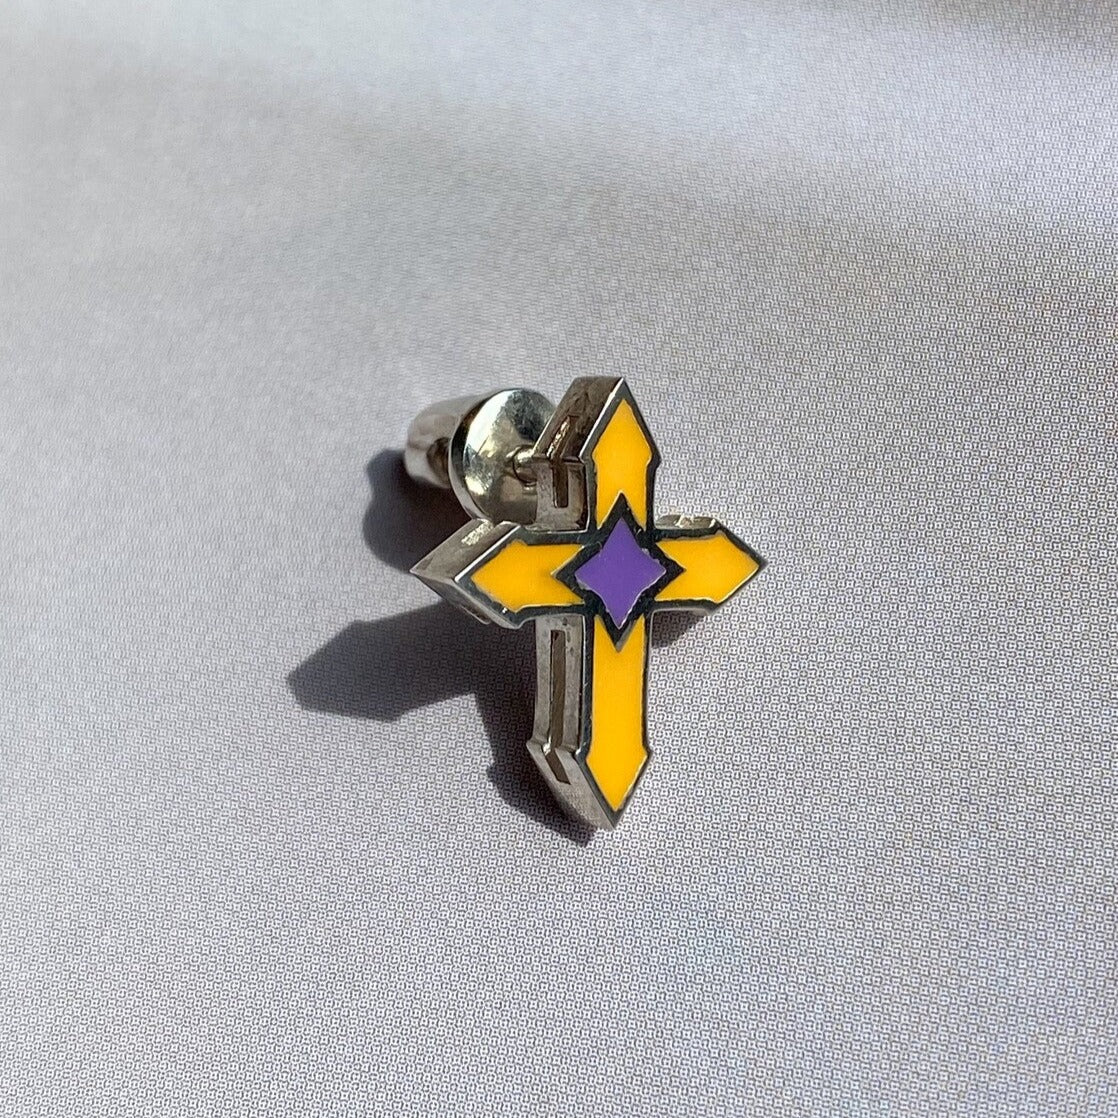 STUD CROSS “STAINED GLASS” / SILVER & COLORED ENAMEL